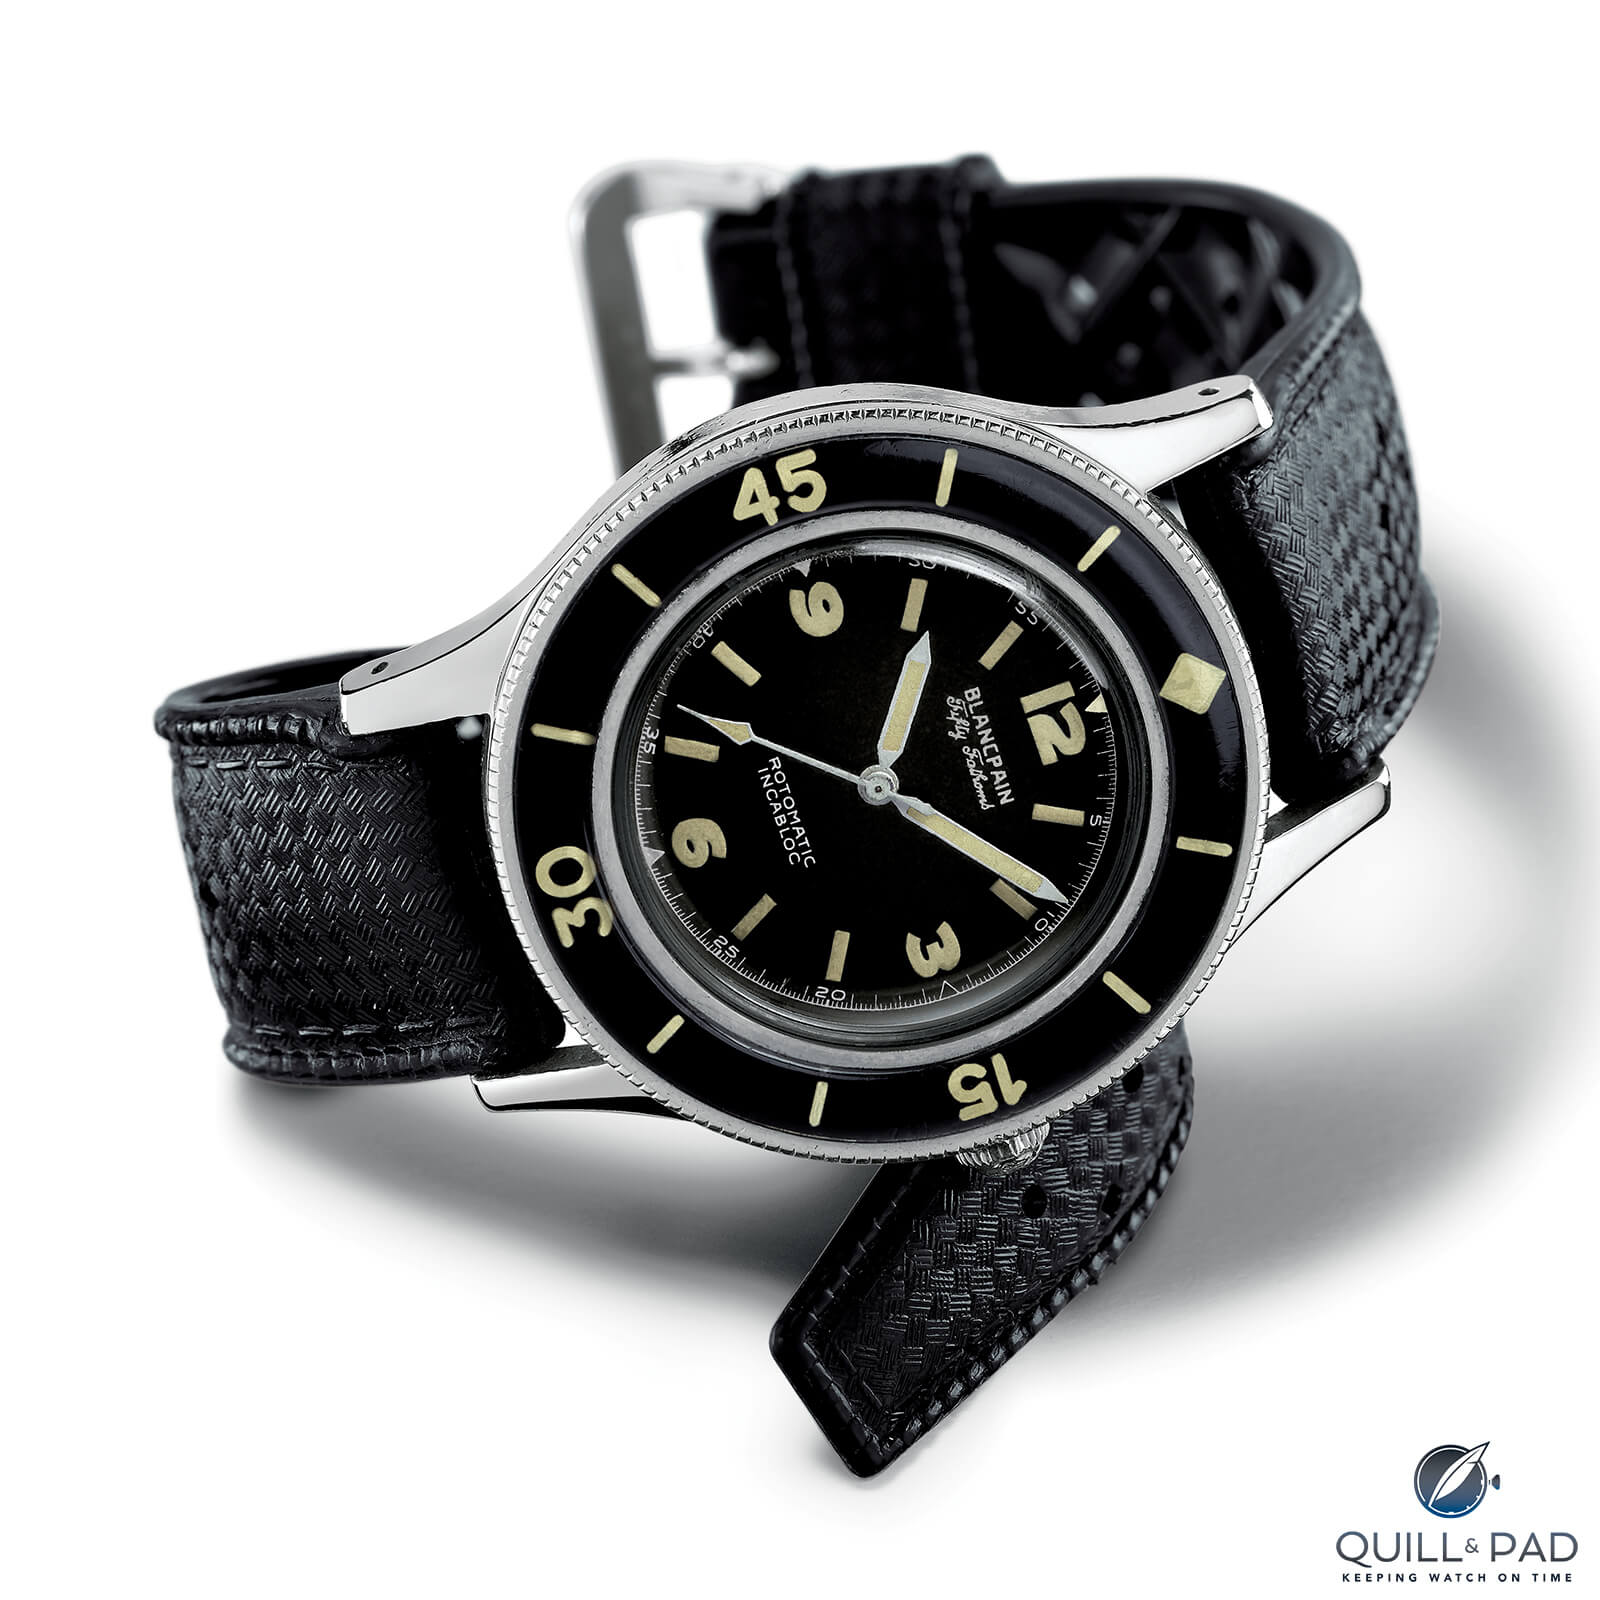 Blancpain Fifty Fathoms Story Of The Worlds First Diving Watch (Video)